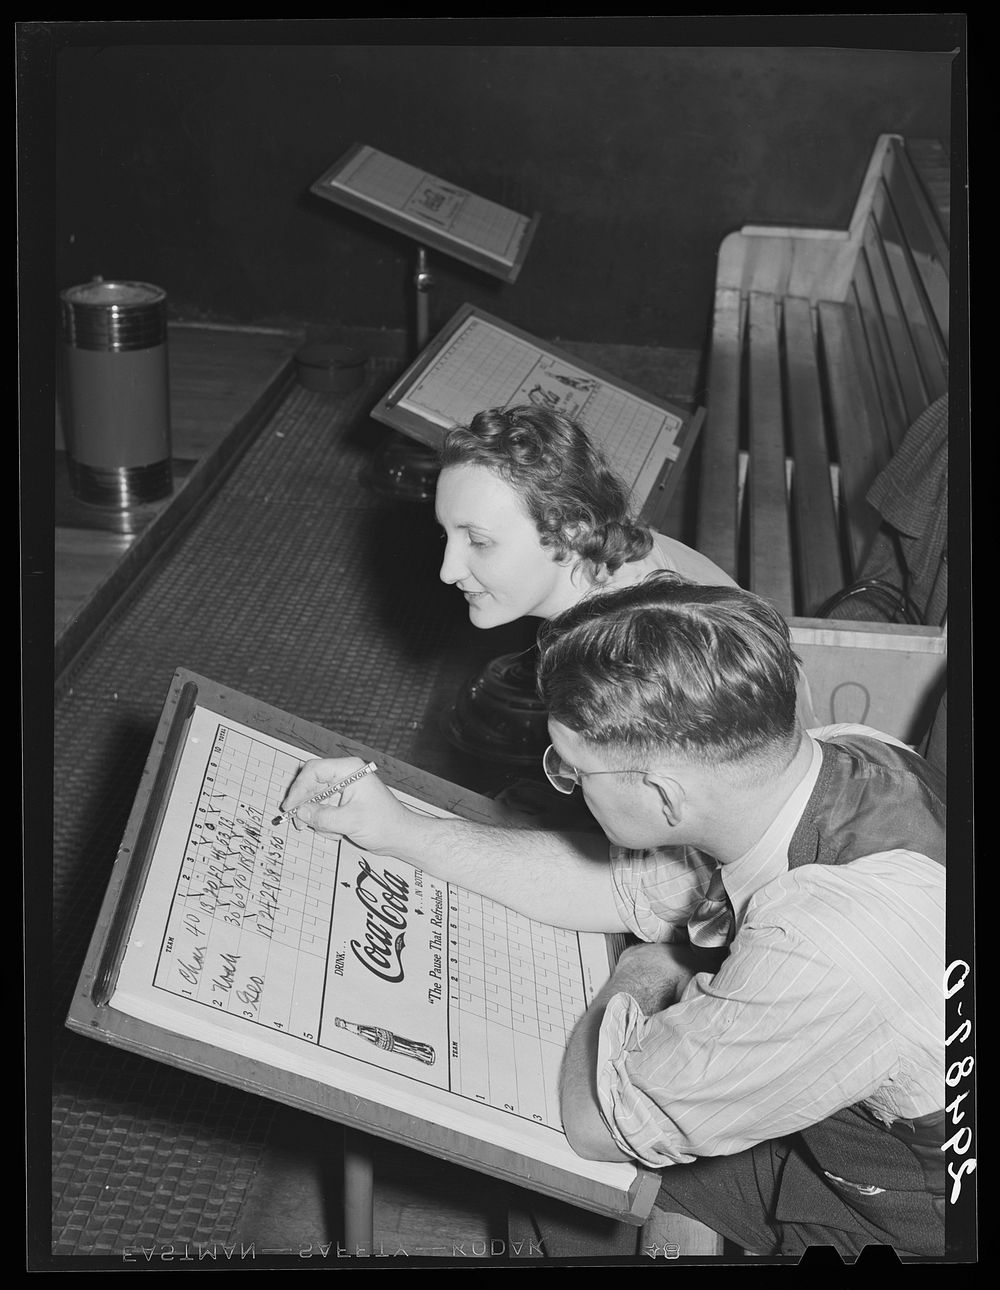 Keeping score. Bowling alley, Clinton, Indiana. Sourced from the Library of Congress.